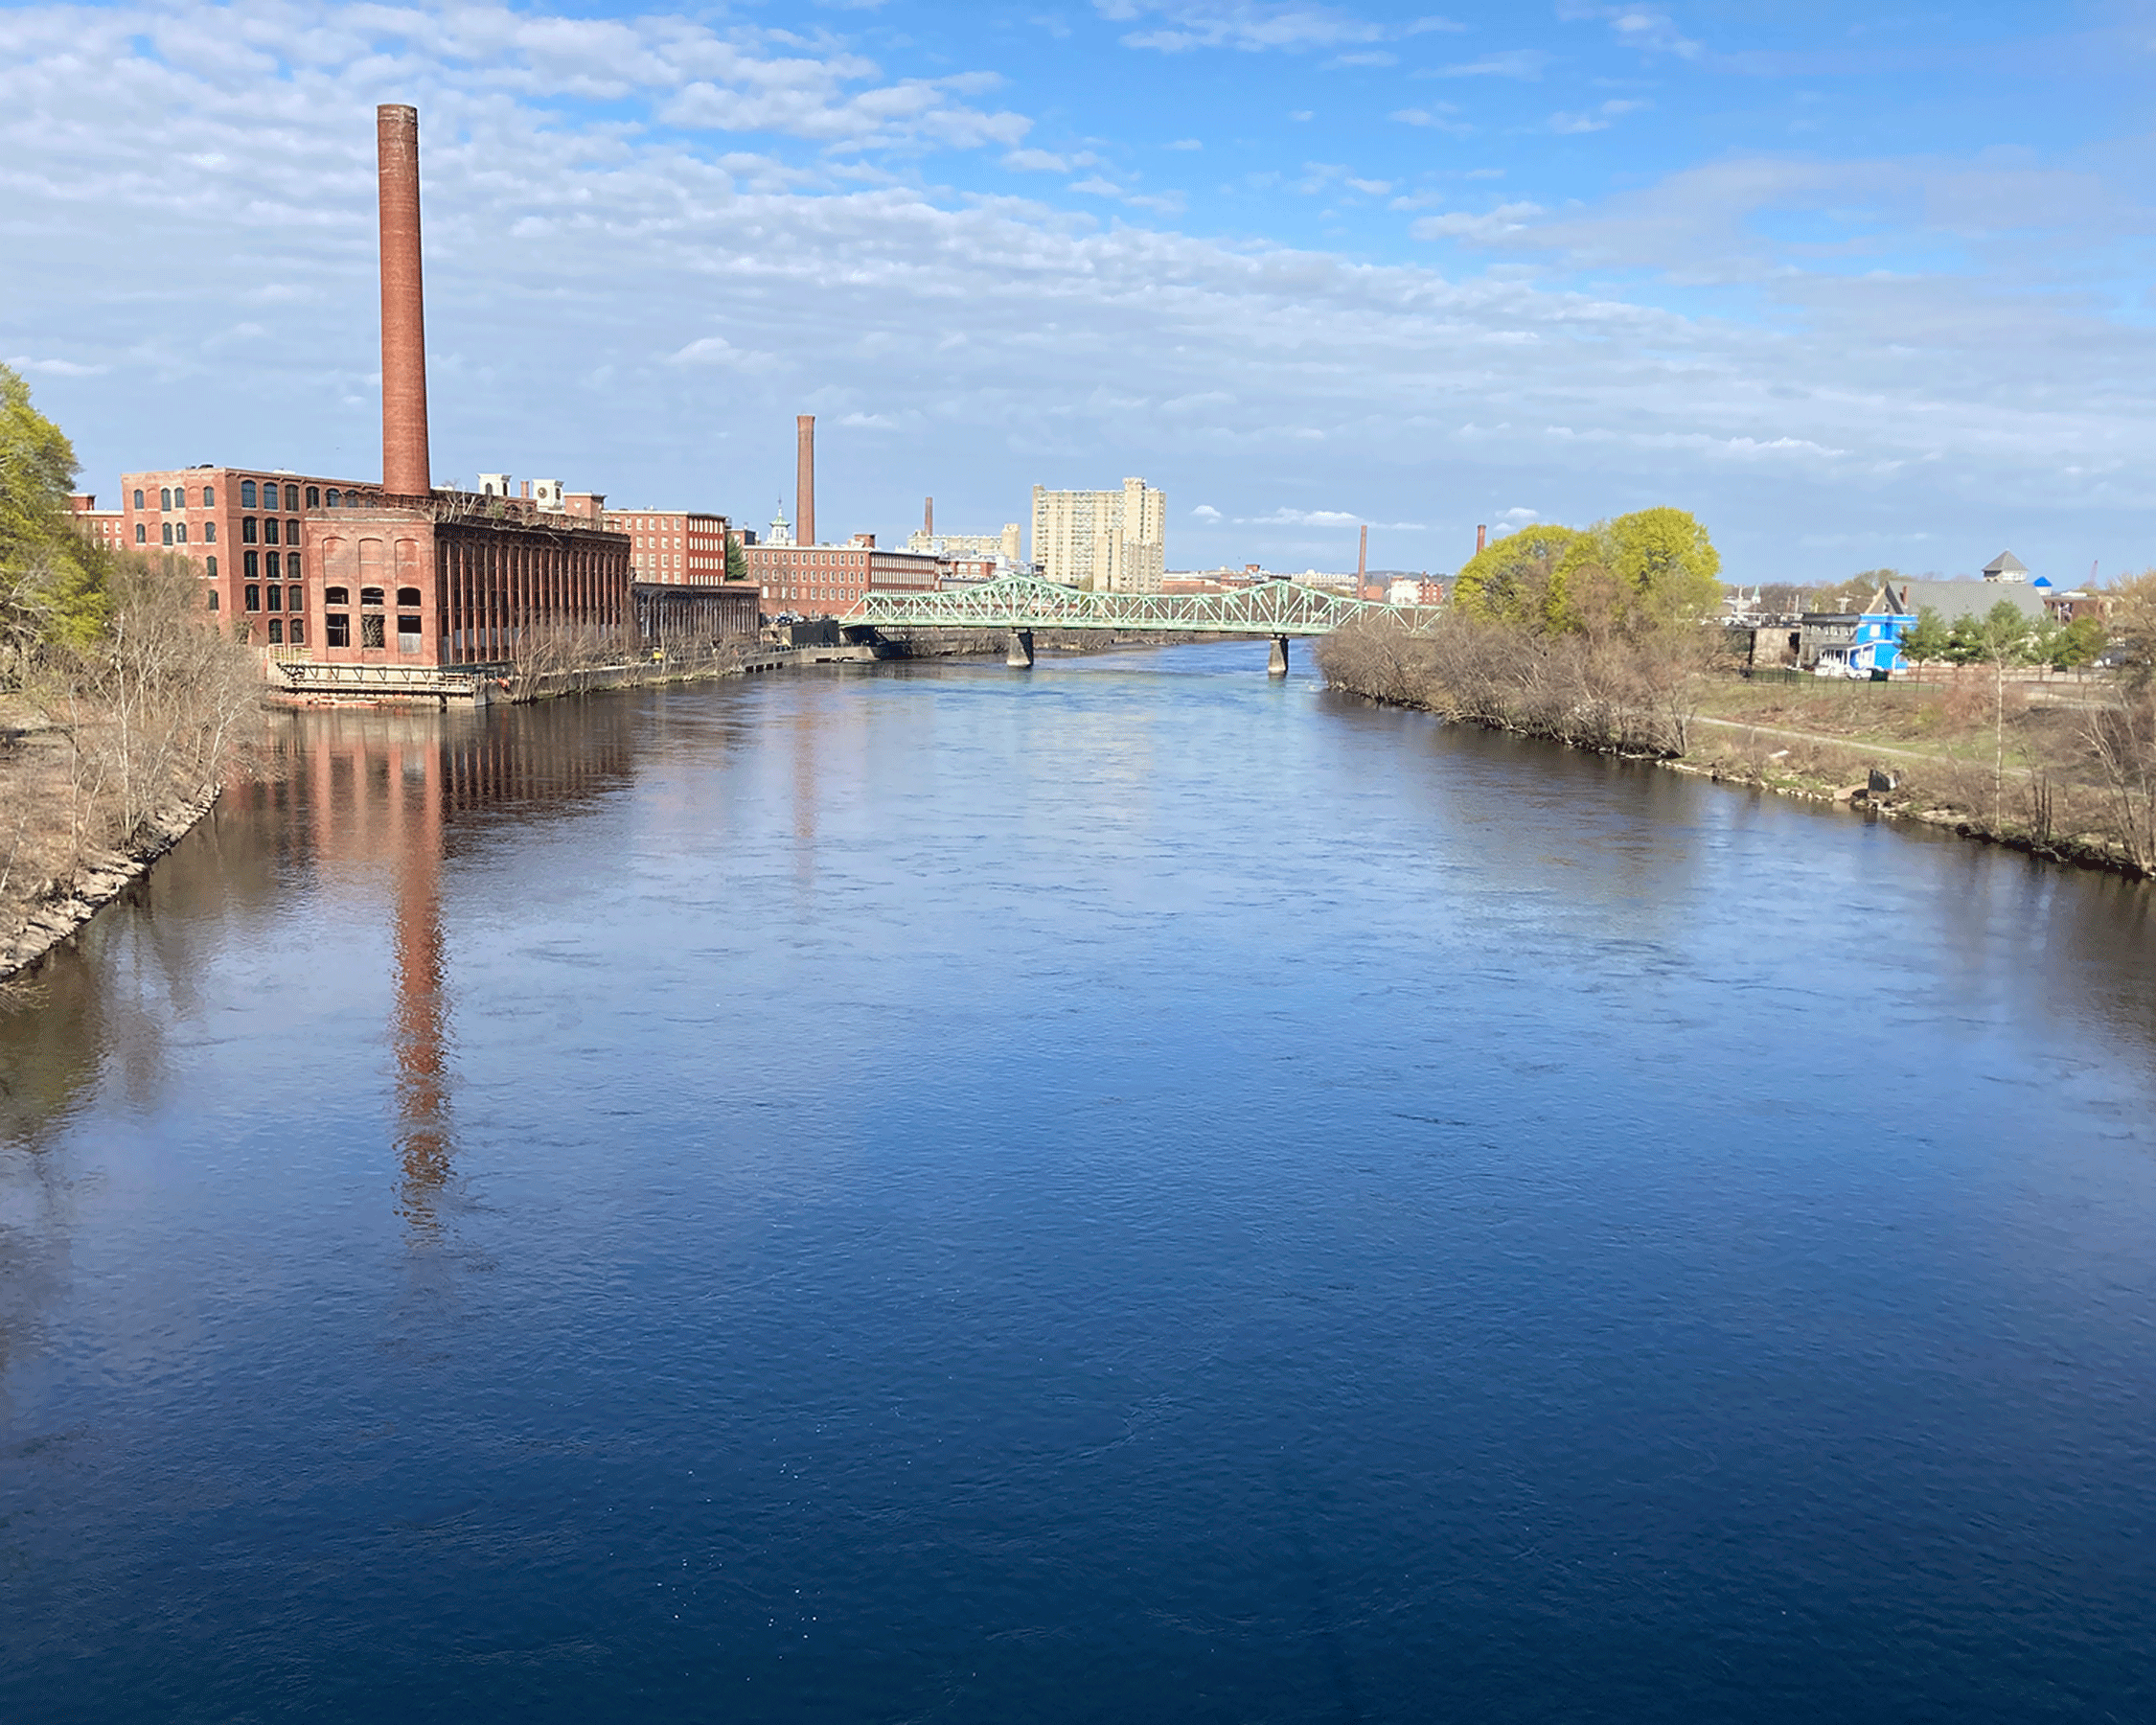 Photograph of the Merrimack River flowing through an urban area with historic brick
                     mill buildings and a truss bridge.